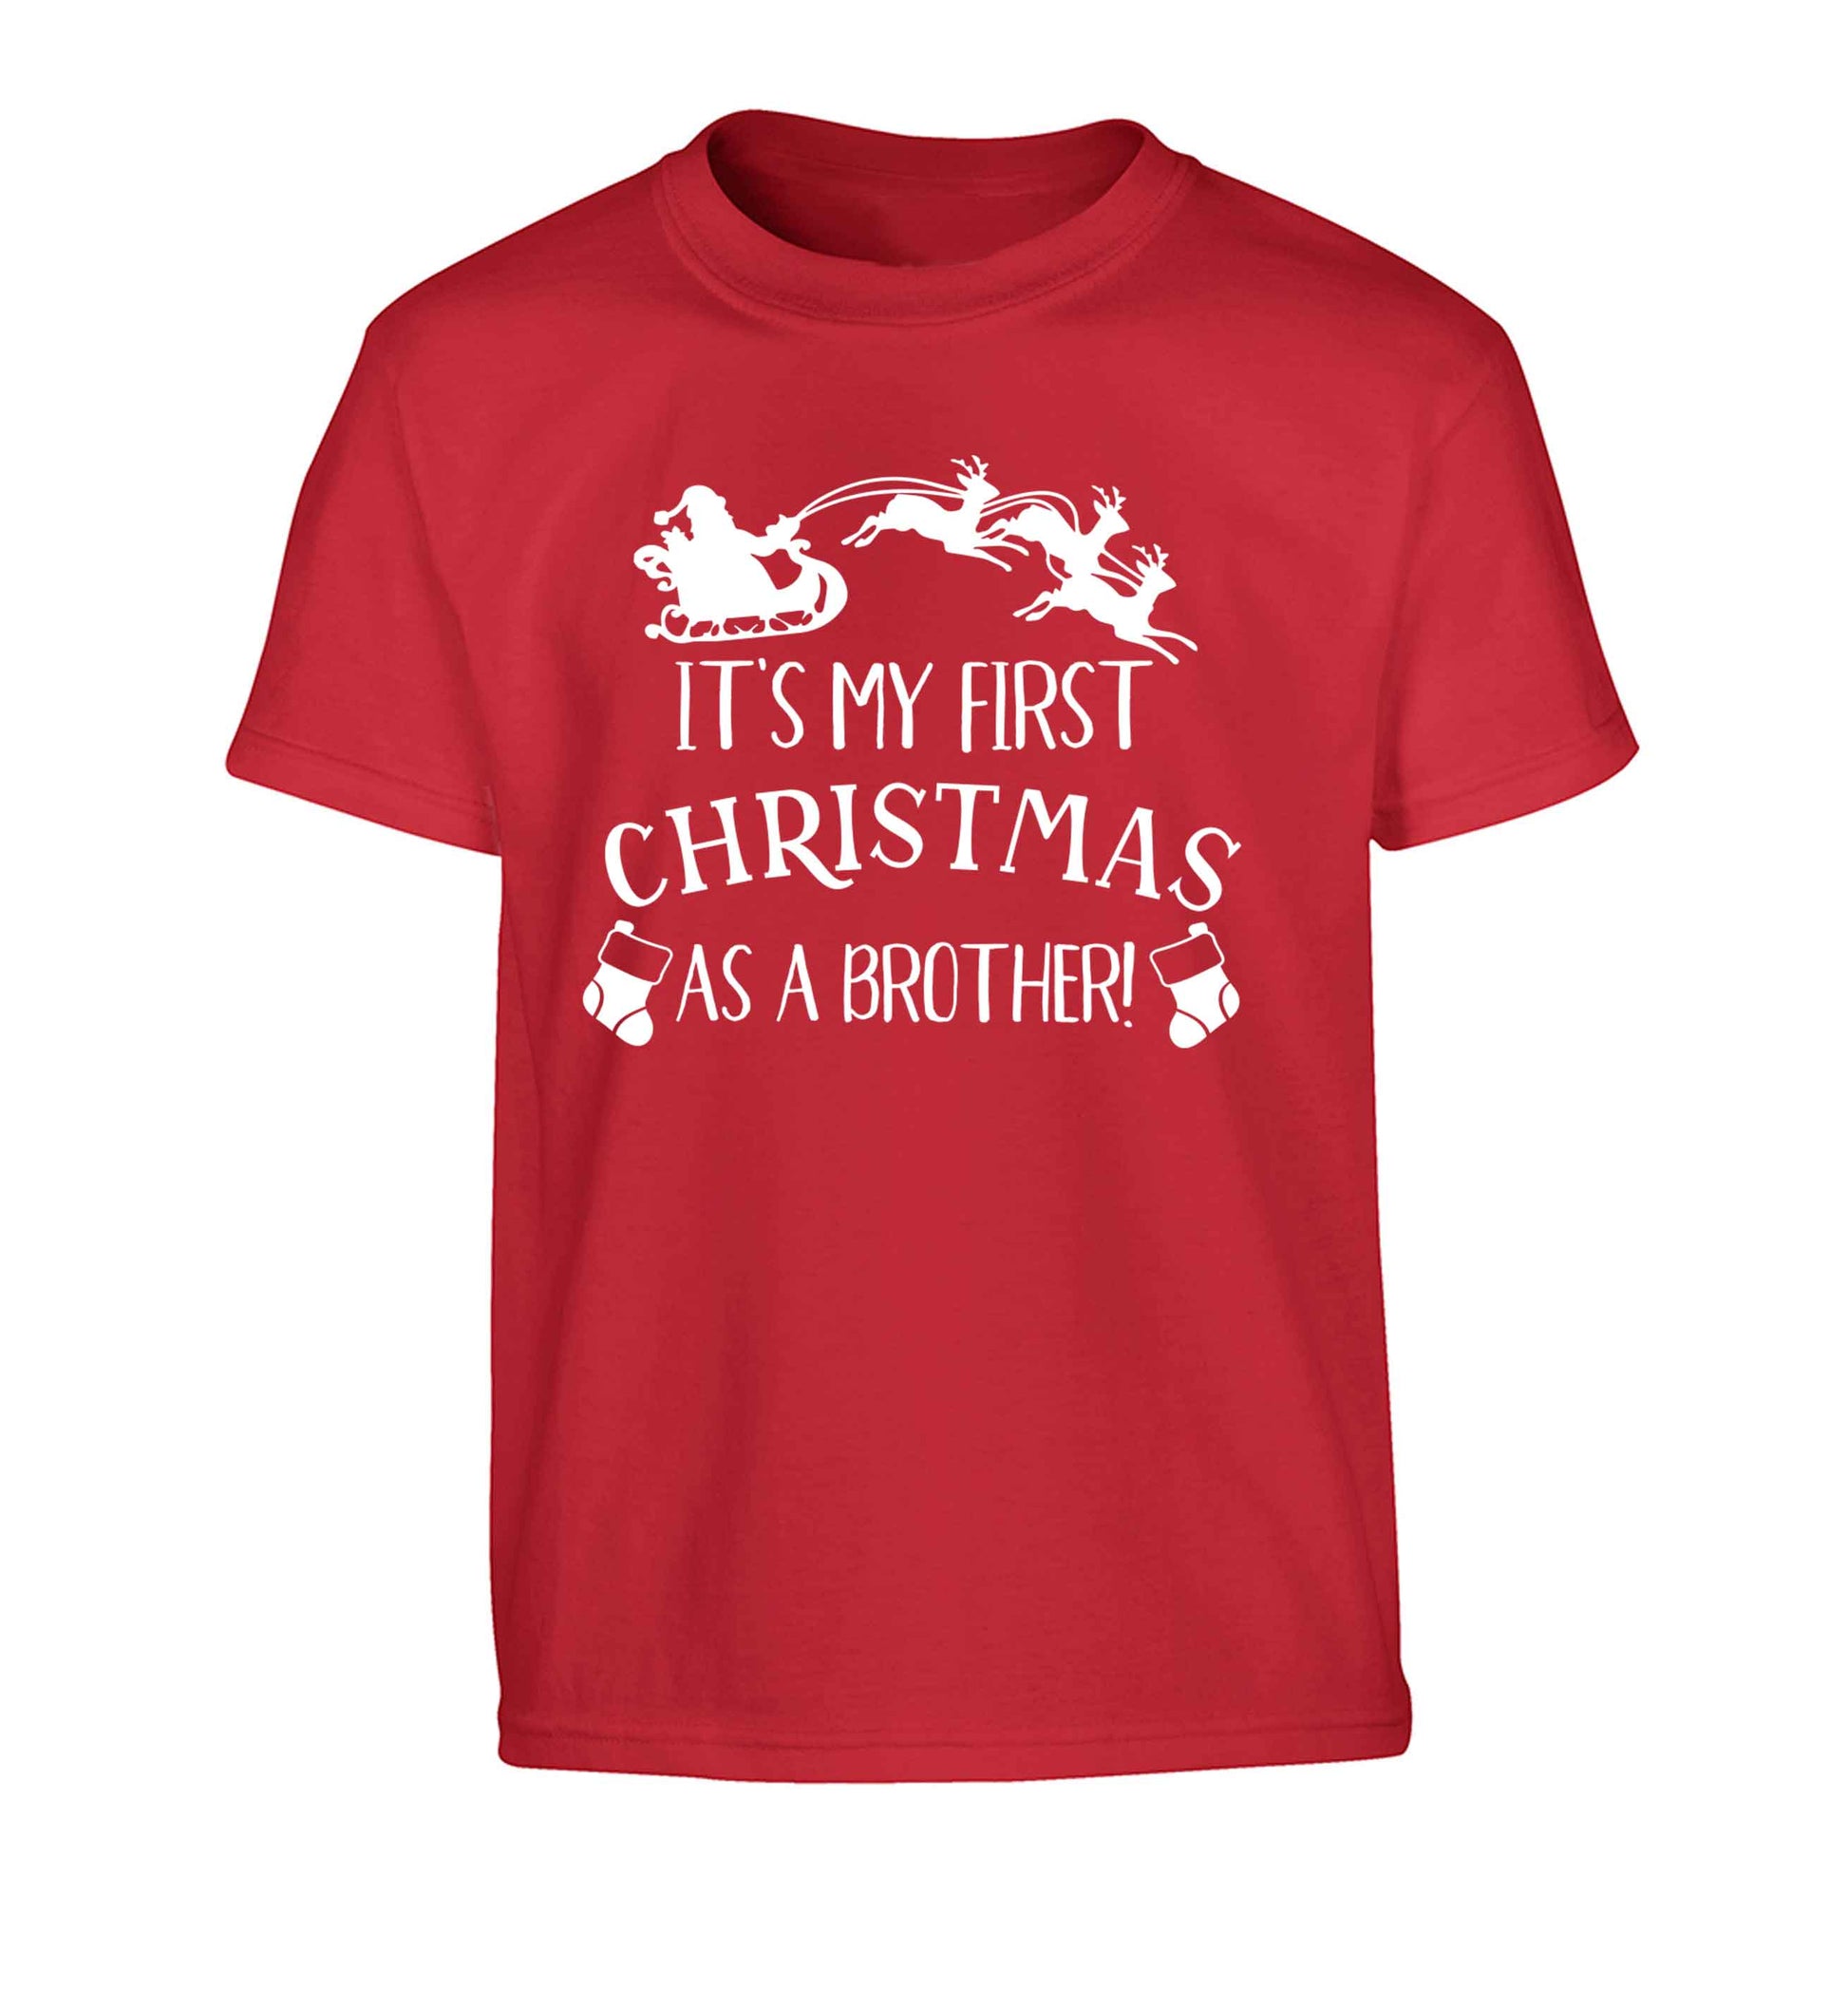 It's my first Christmas as a brother! Children's red Tshirt 12-13 Years